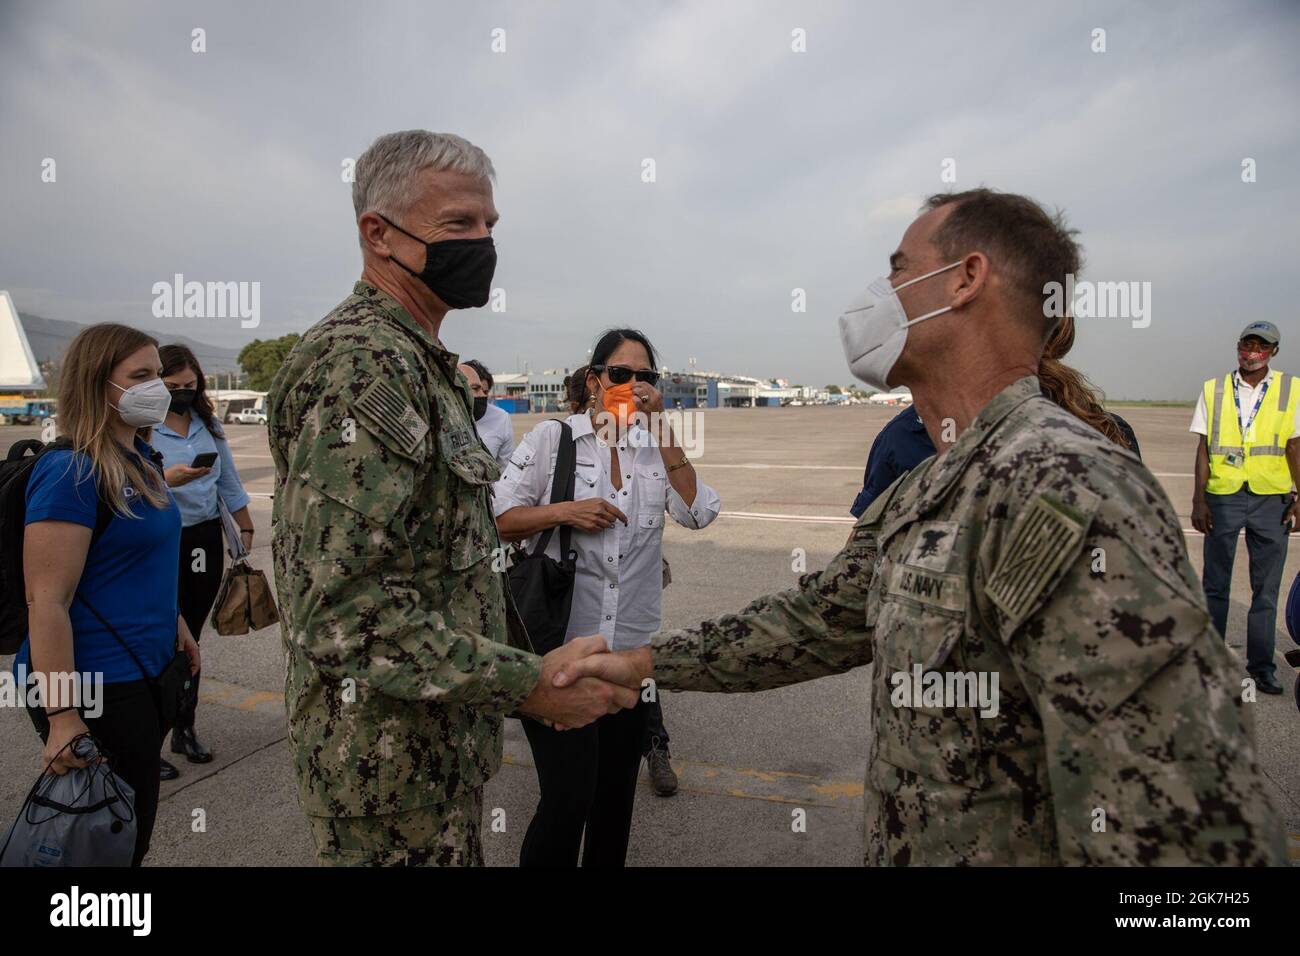 U.S. Navy Adm. Craig Faller, U.S. Southern Command commander, arrives at the Port-au-Prince international airport on Aug. 26, 2021. Joint Task Force-Haiti deployed quickly to support U.S. Agency for International Development and enable airlift capability to deliver humanitarian aid to remote locations in the southern peninsula of Haiti. Stock Photo